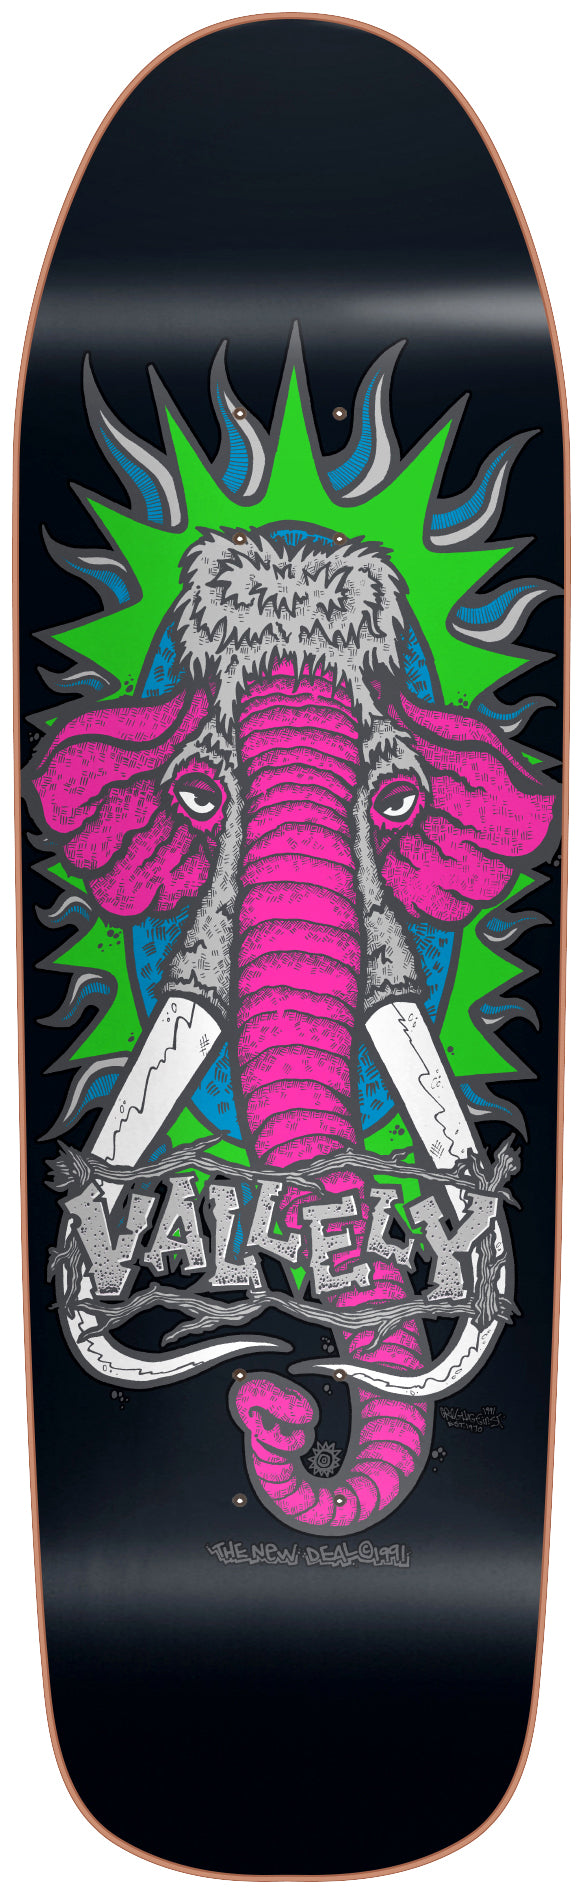 New Deal - Mike Vallely - Mammoth Neon Old School Skateboard Deck - Invisible Board Shop